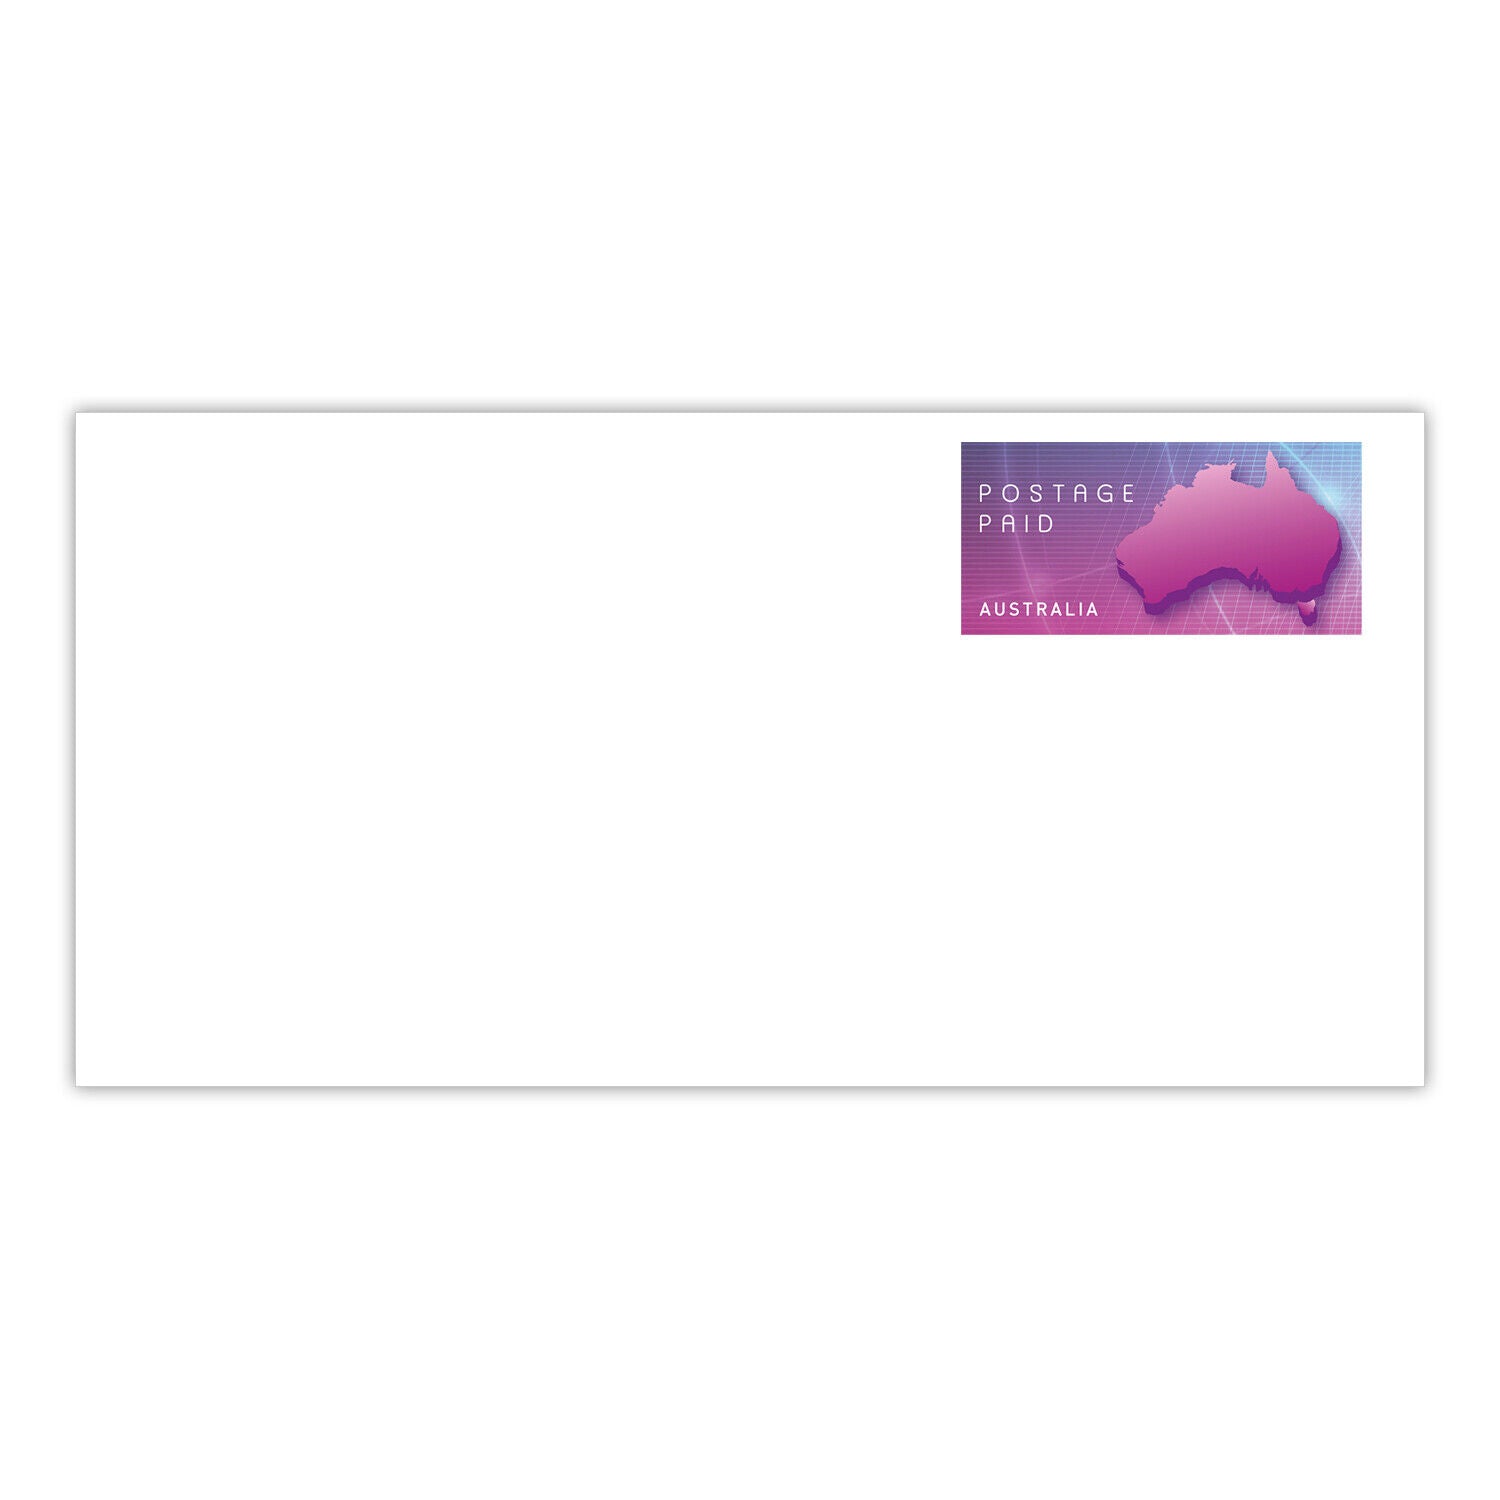 Australia Post Small DL Prepaid Envelope up to 250g – 100 Pack RRP $141